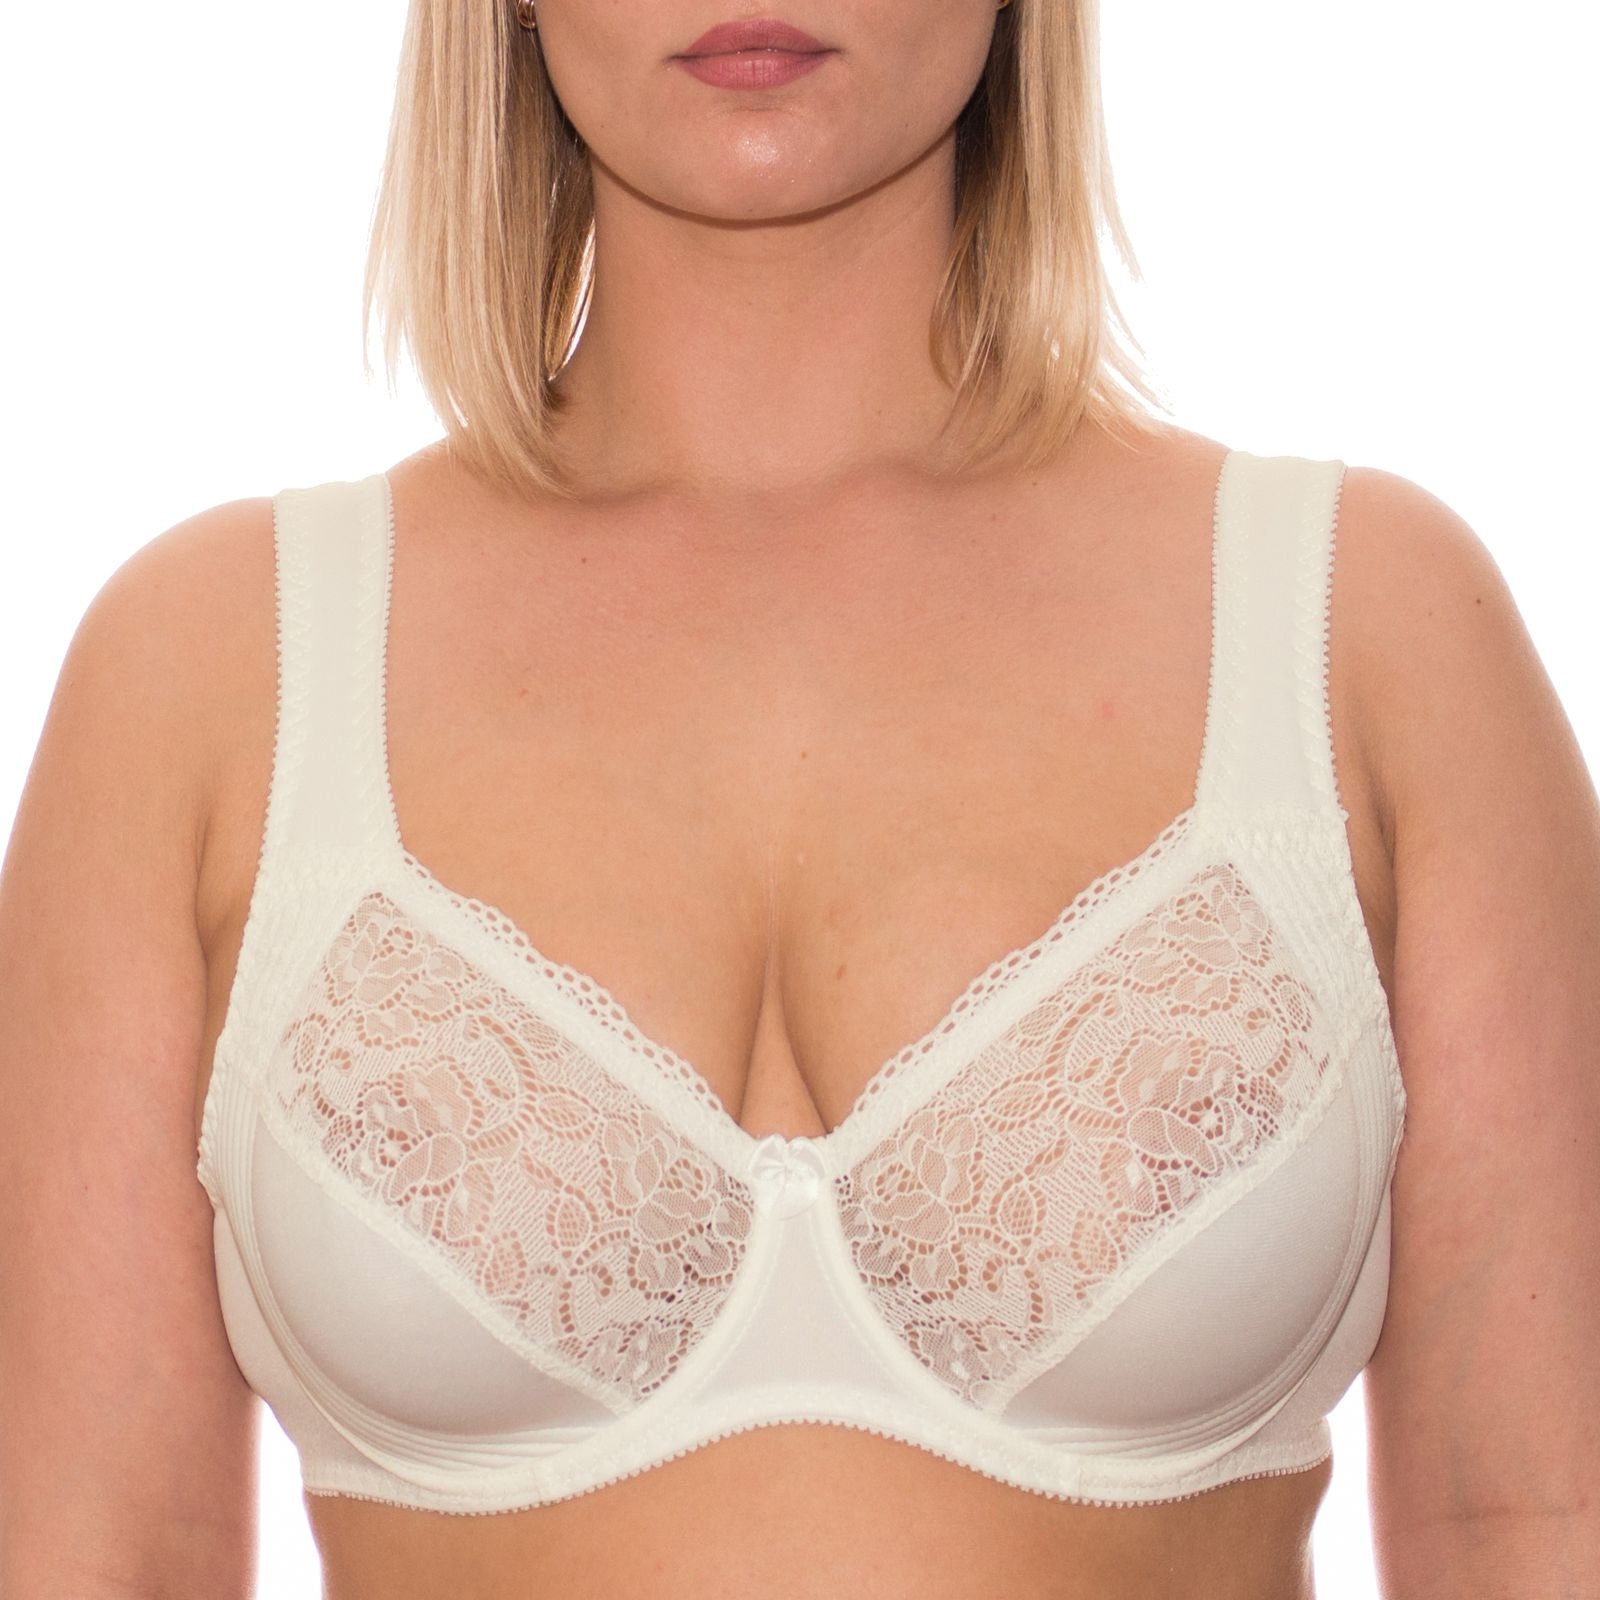 Underwire Full Coverage Bra Wide Straps Support Panels Plus Size 34 36 38  40 42 44 46 / C D E F G H I J (46H, Ivory) 